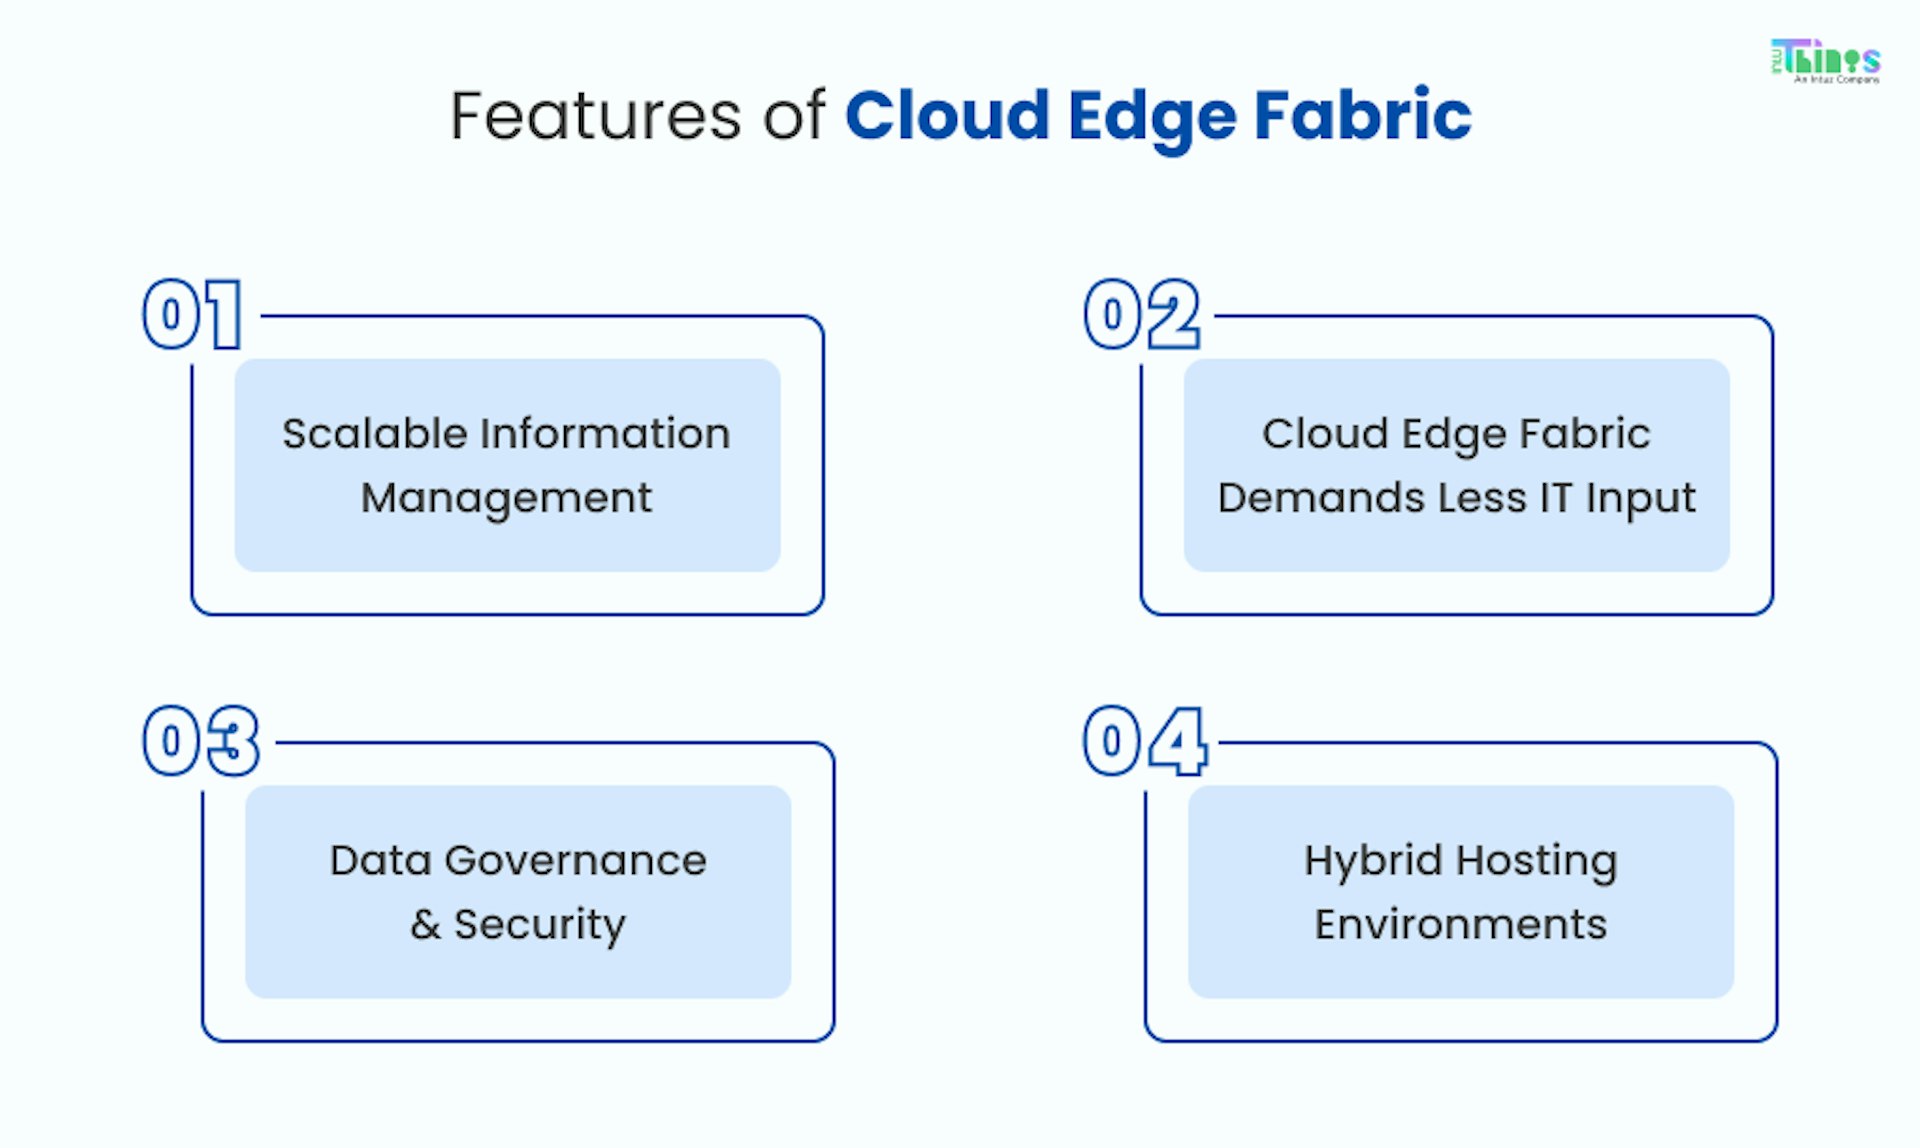 Features of Cloud Edge Fabric